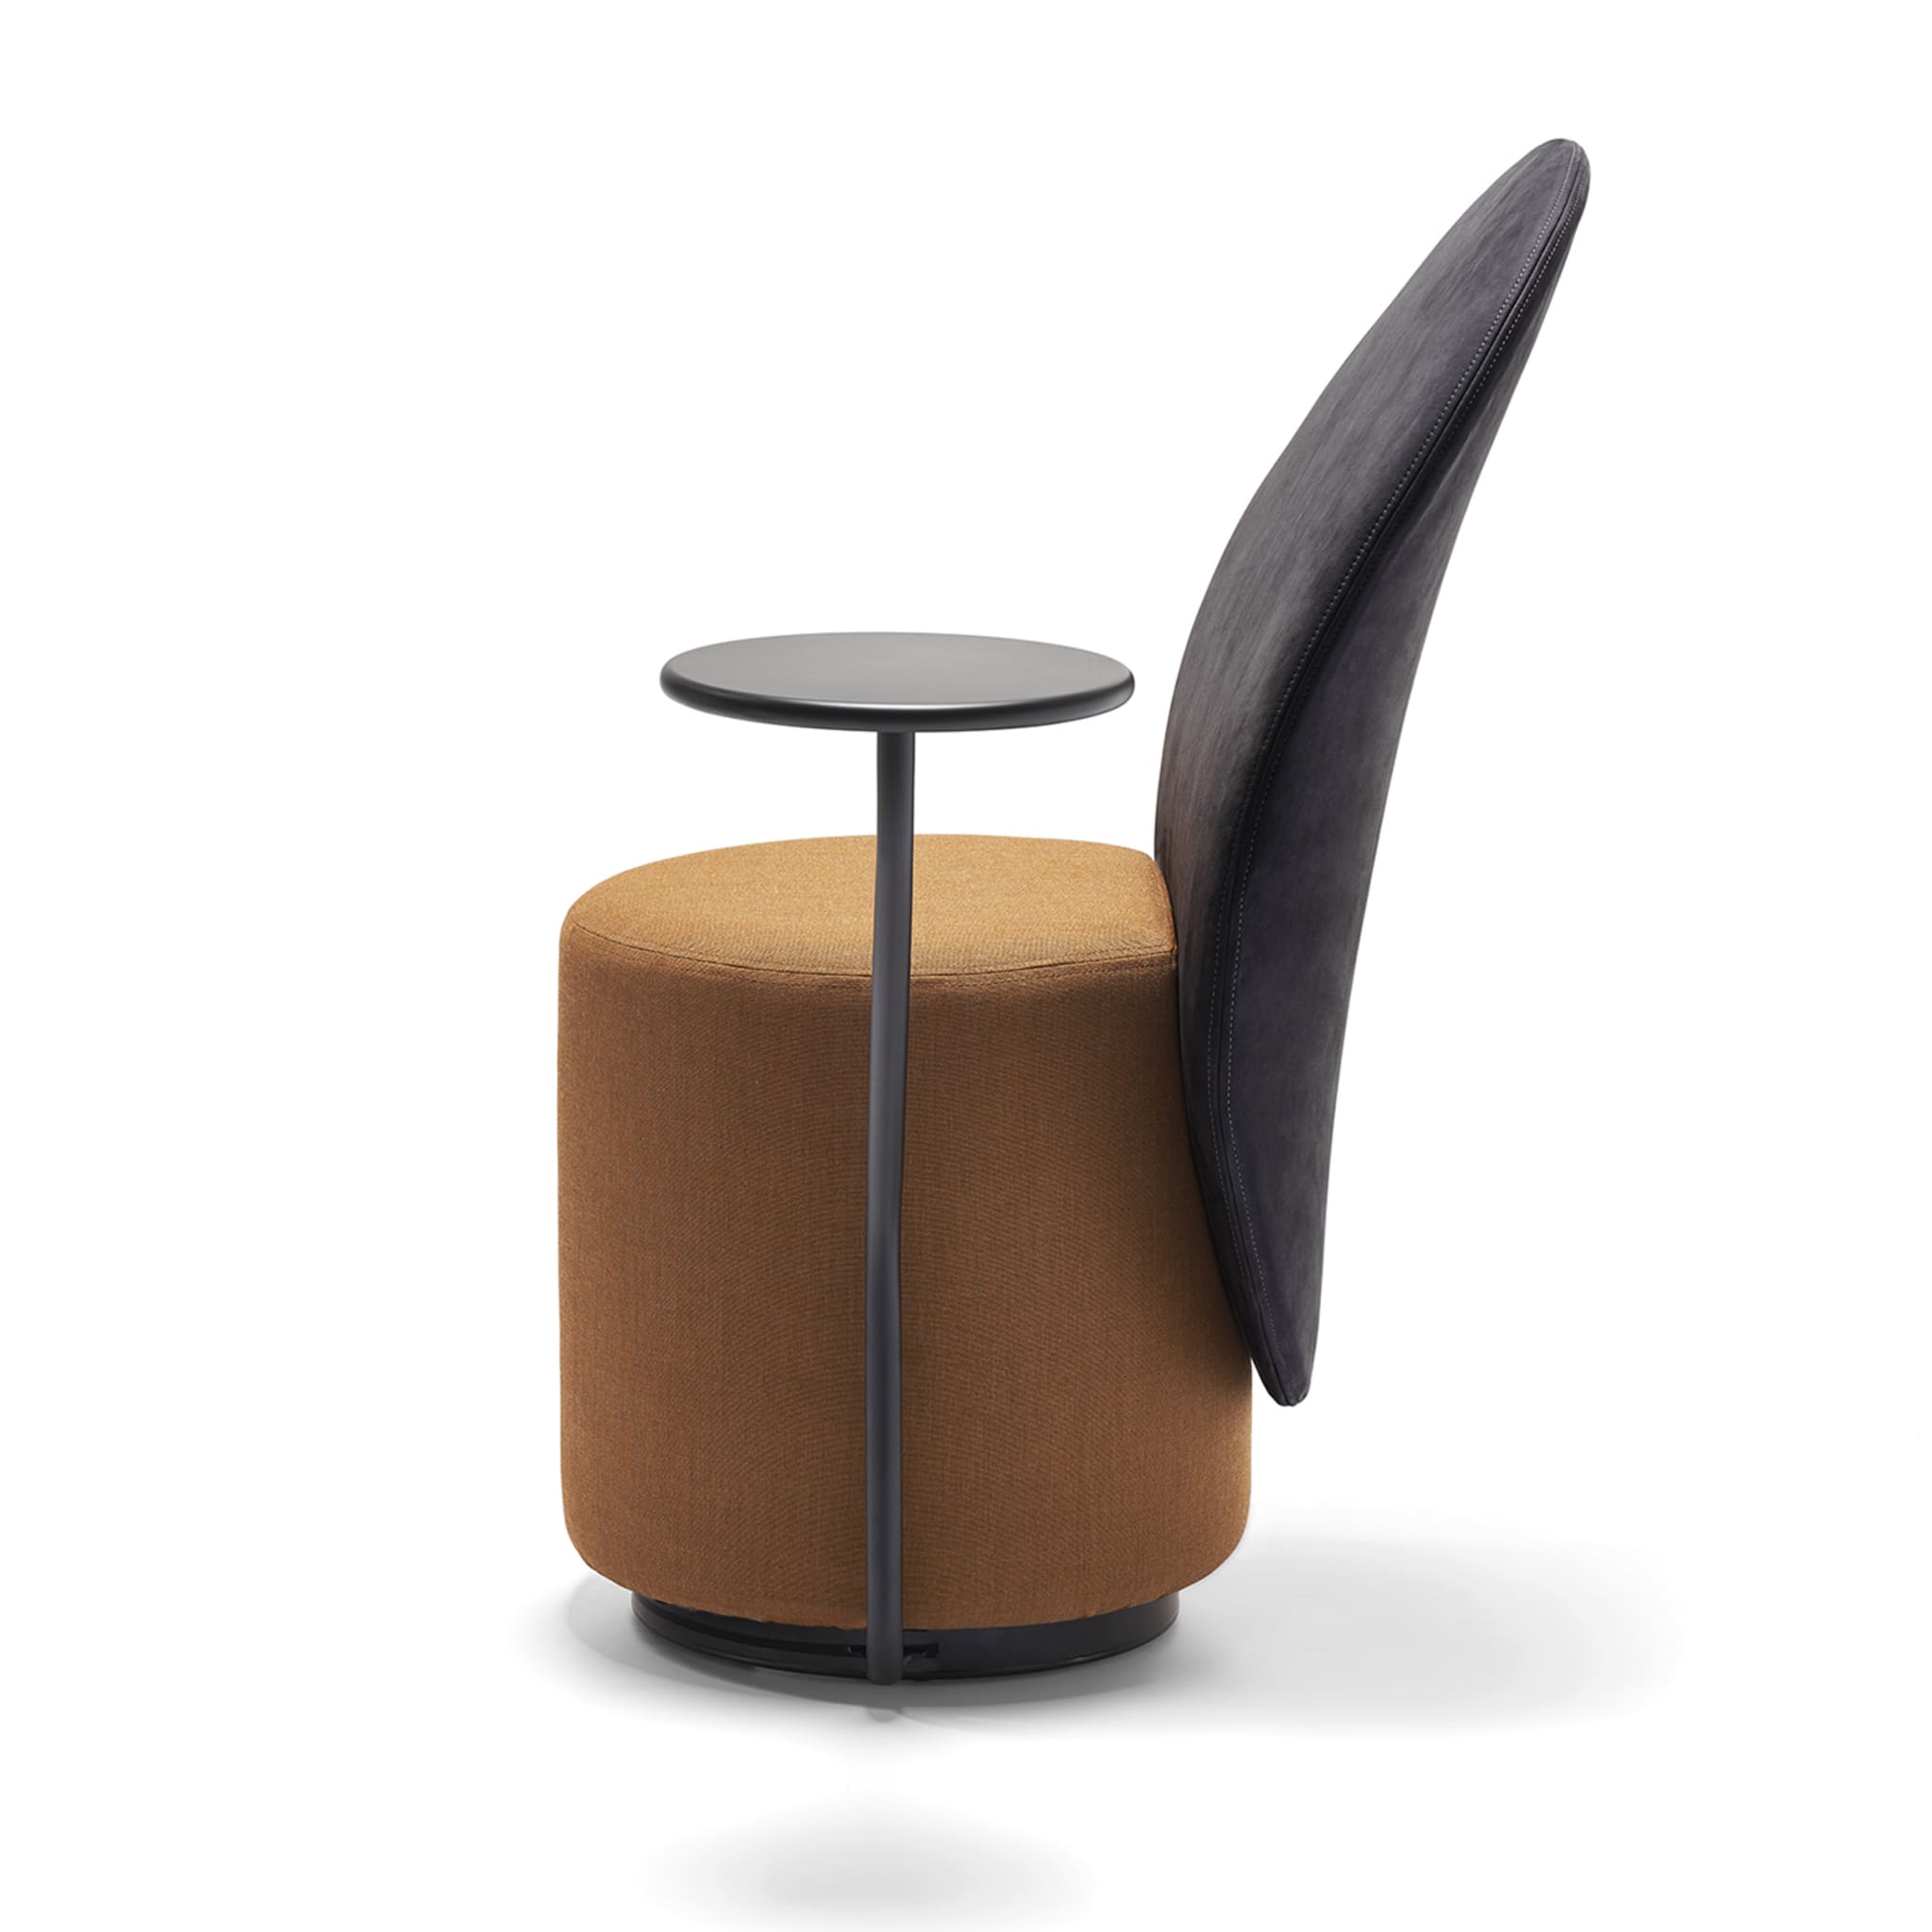 Loomi Black and Mustard Chair with Top by Lapo Ciatti - Alternative view 3